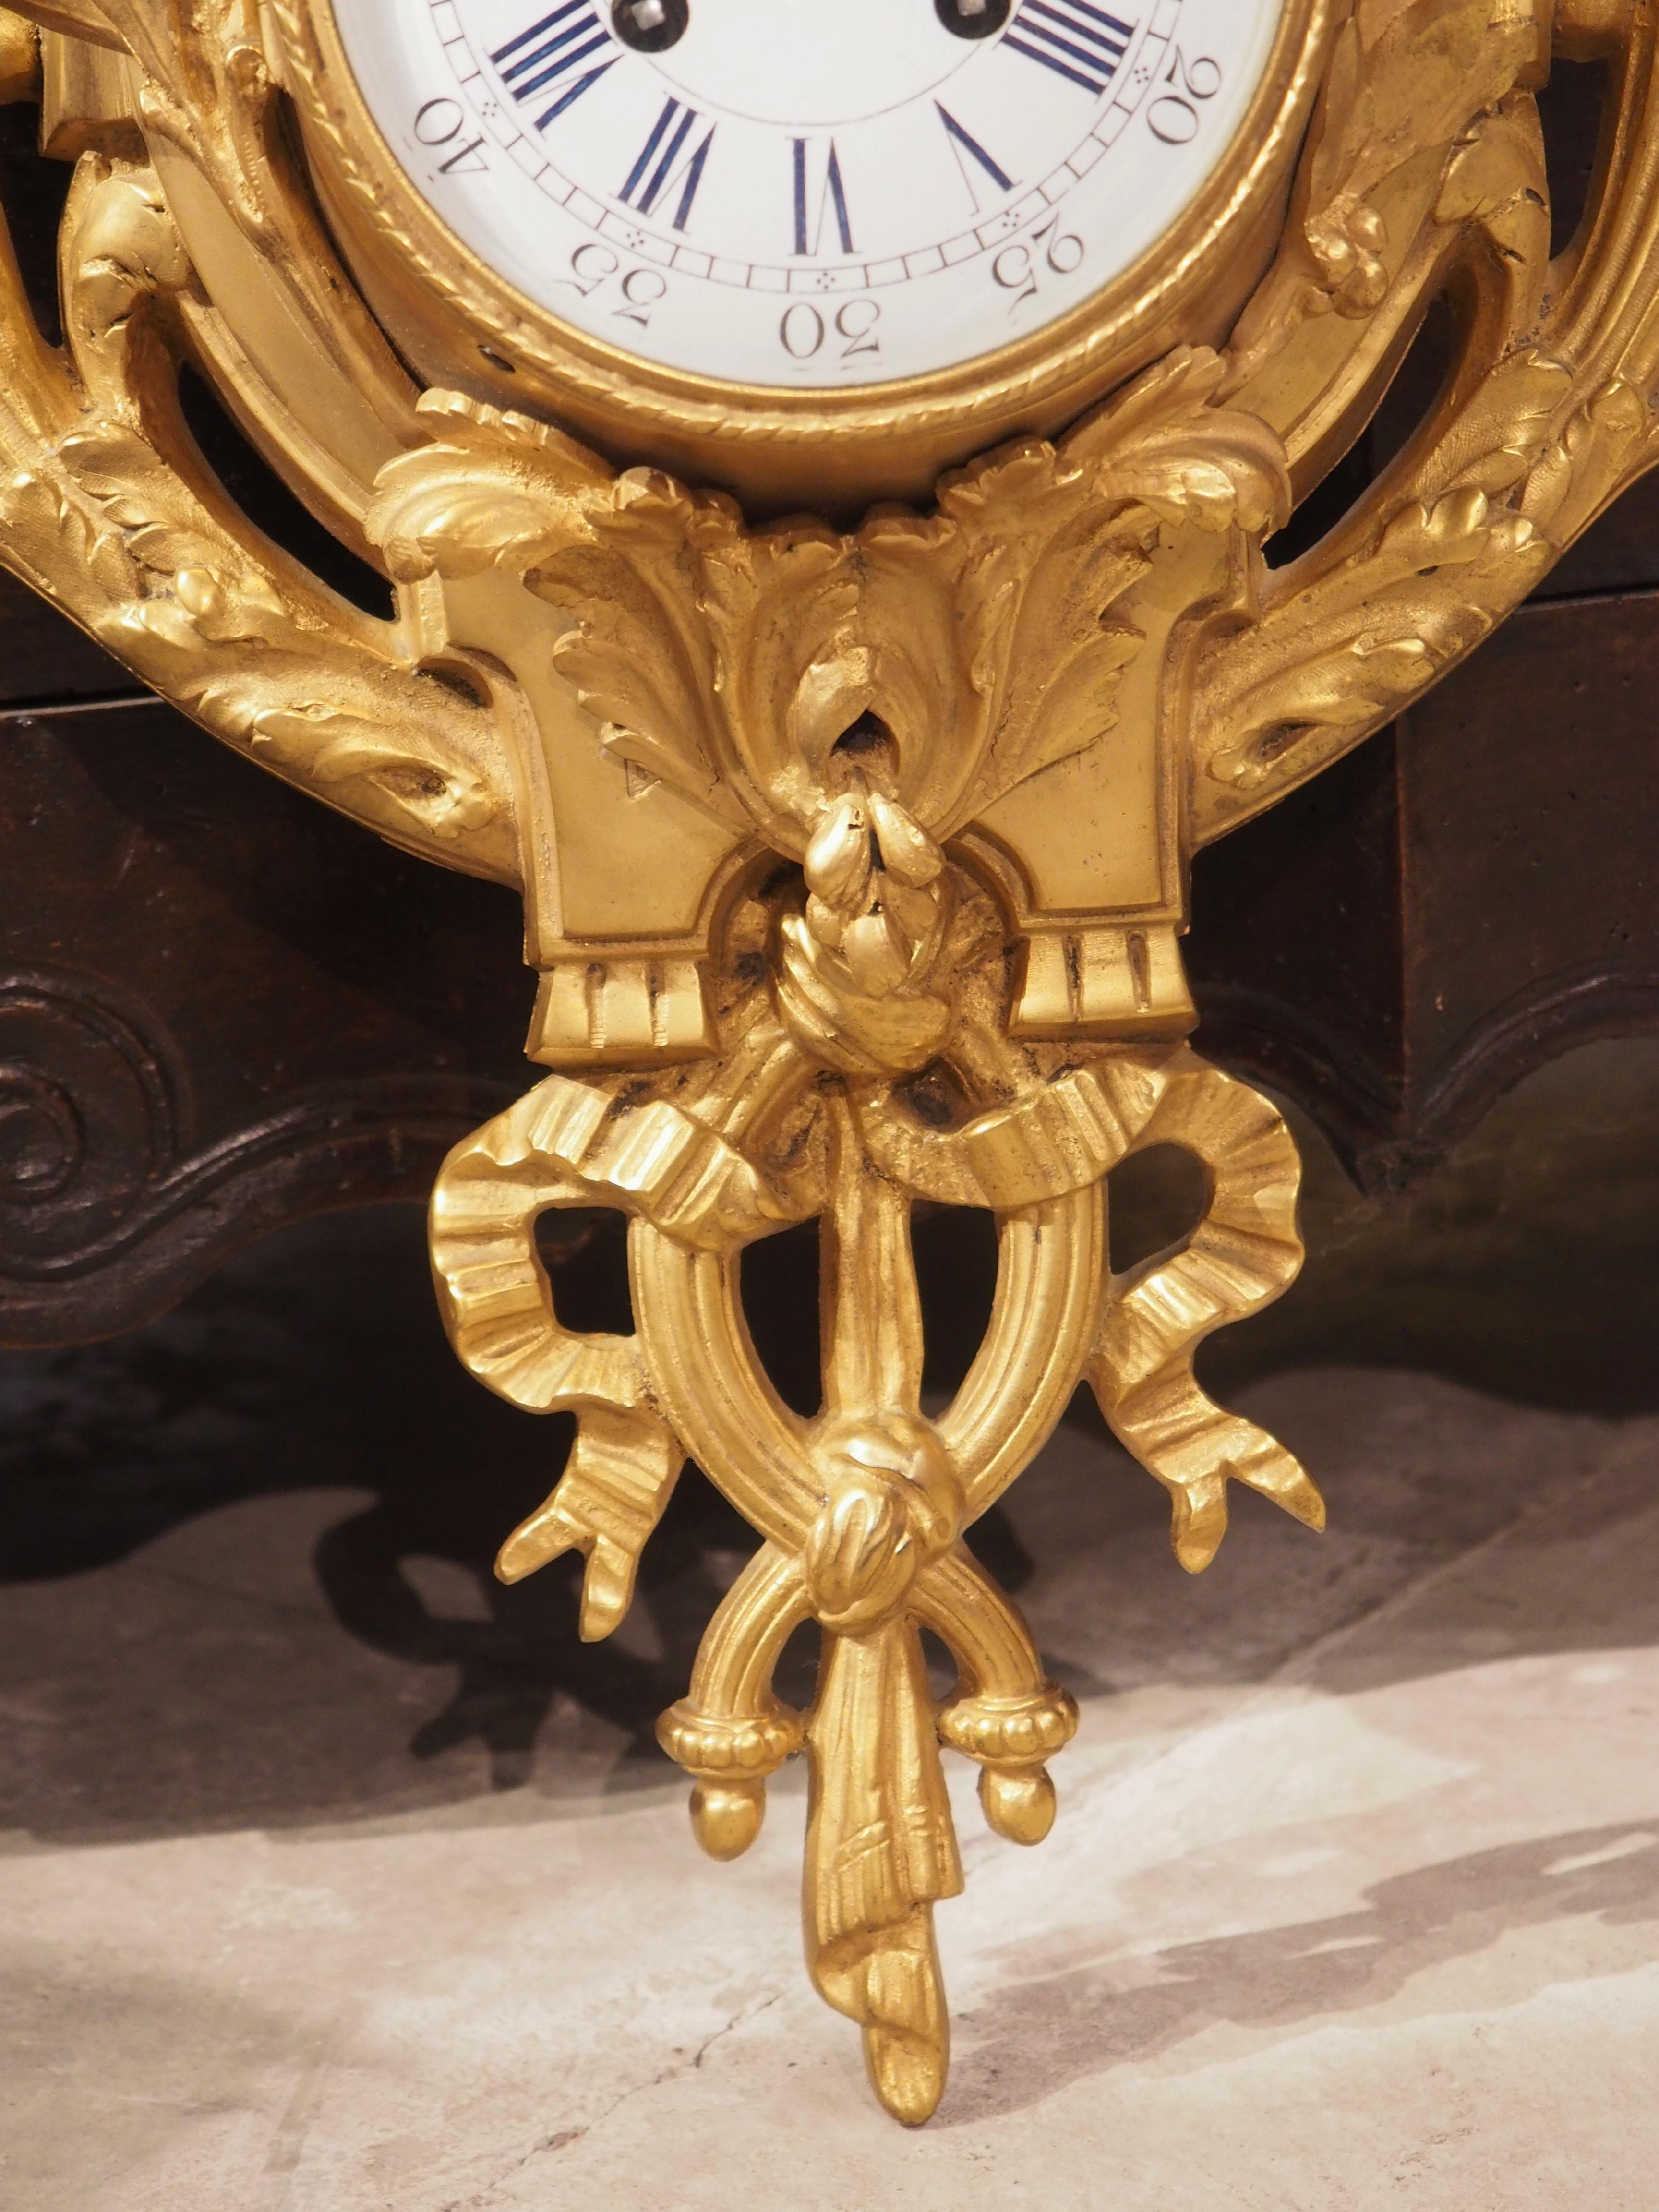 Antique French Louis XVI Style Gilt Bronze Wall Clock, 19th Century For Sale 1